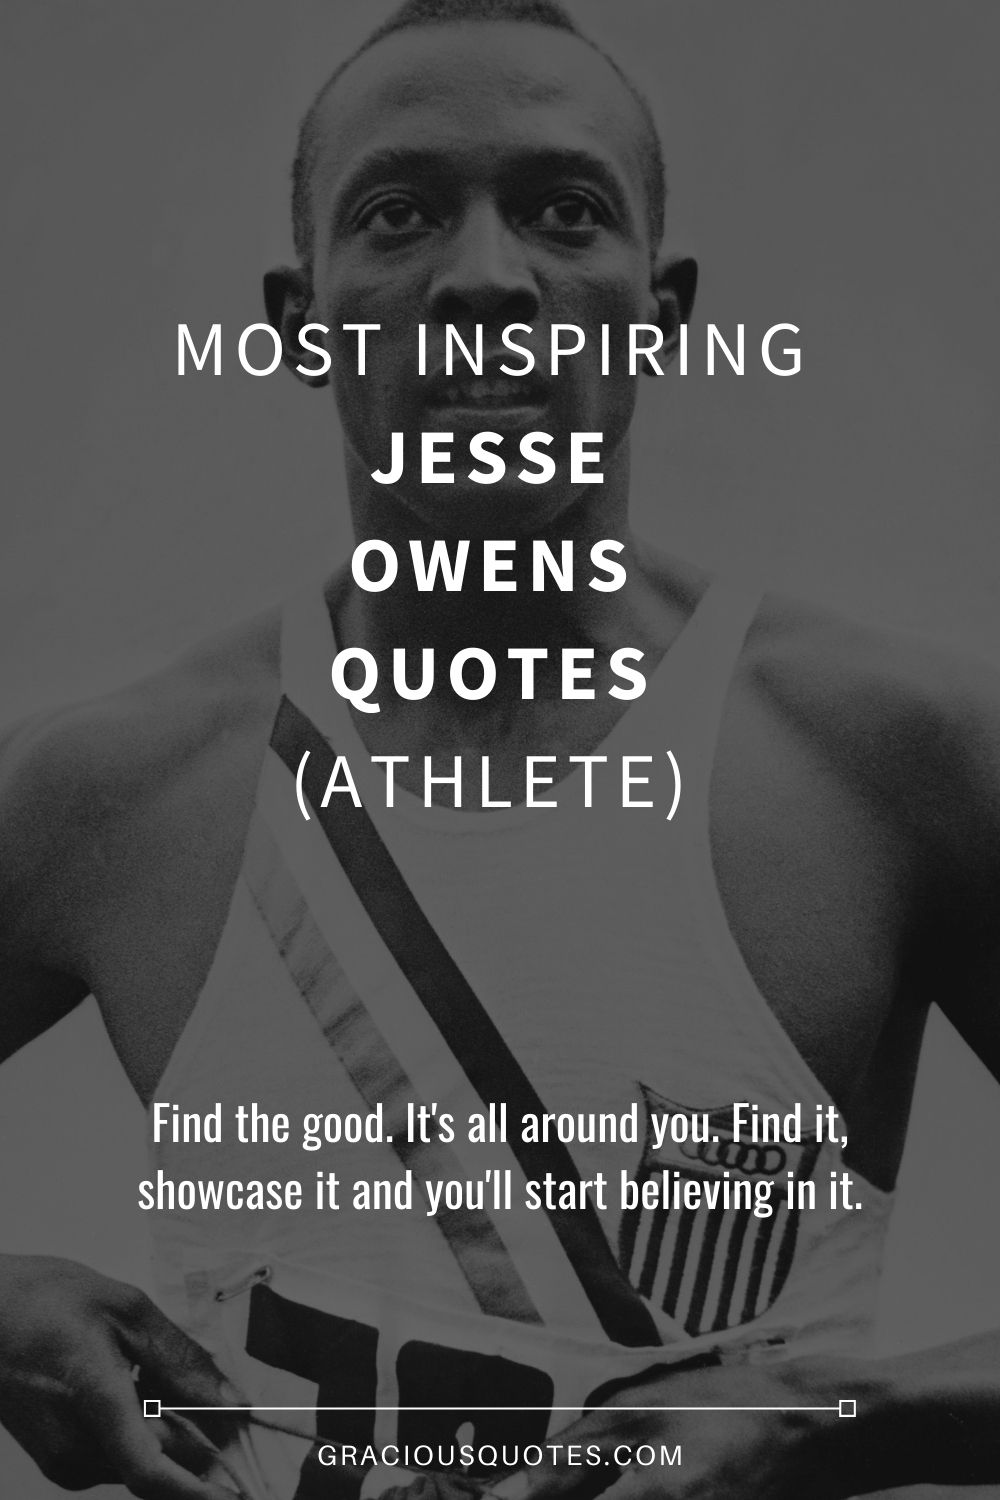 Most Inspiring Jesse Owens Quotes (ATHLETE) - Gracious Quotes